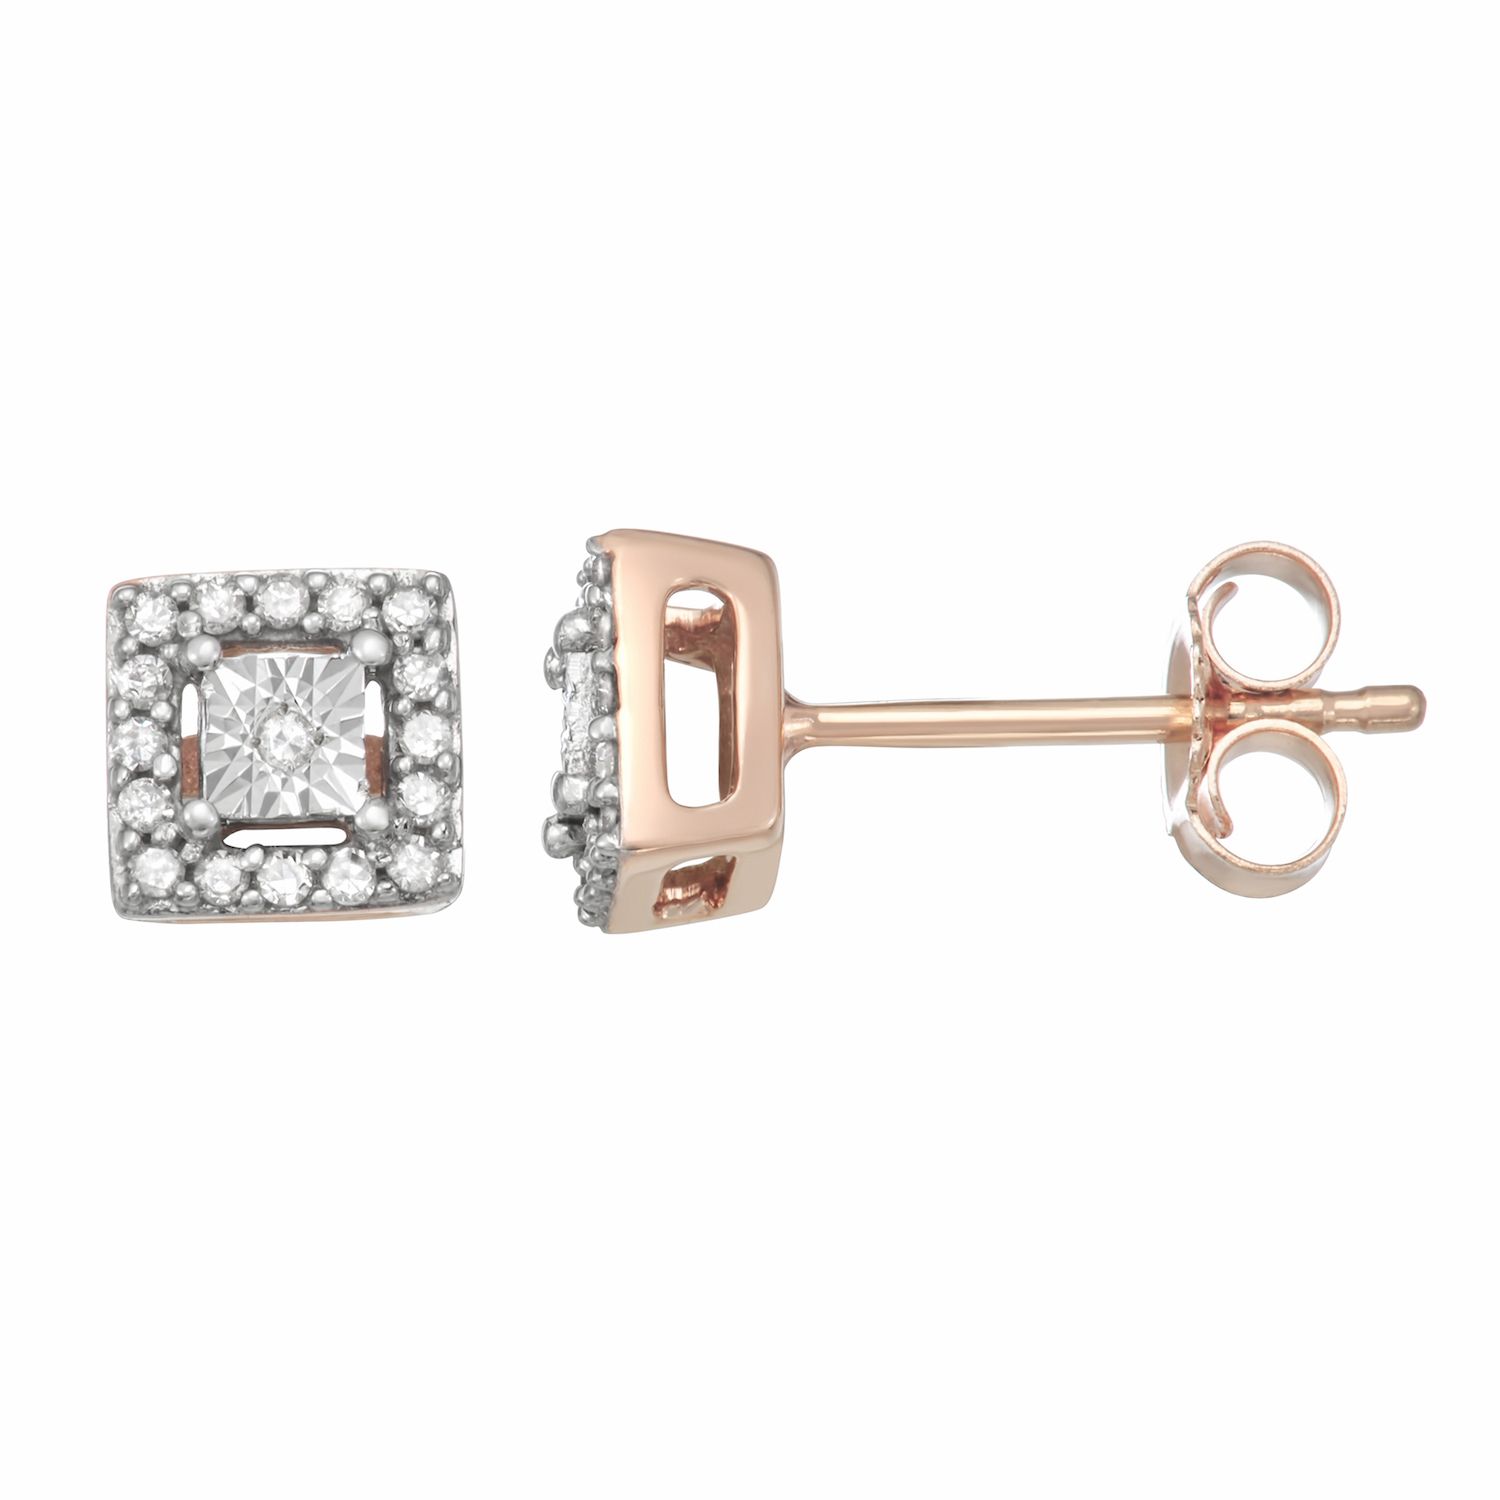 Image for HDI 10k Rose Gold 1/8 Carat T.W. Diamond Square Halo Stud Earrings at Kohl's.